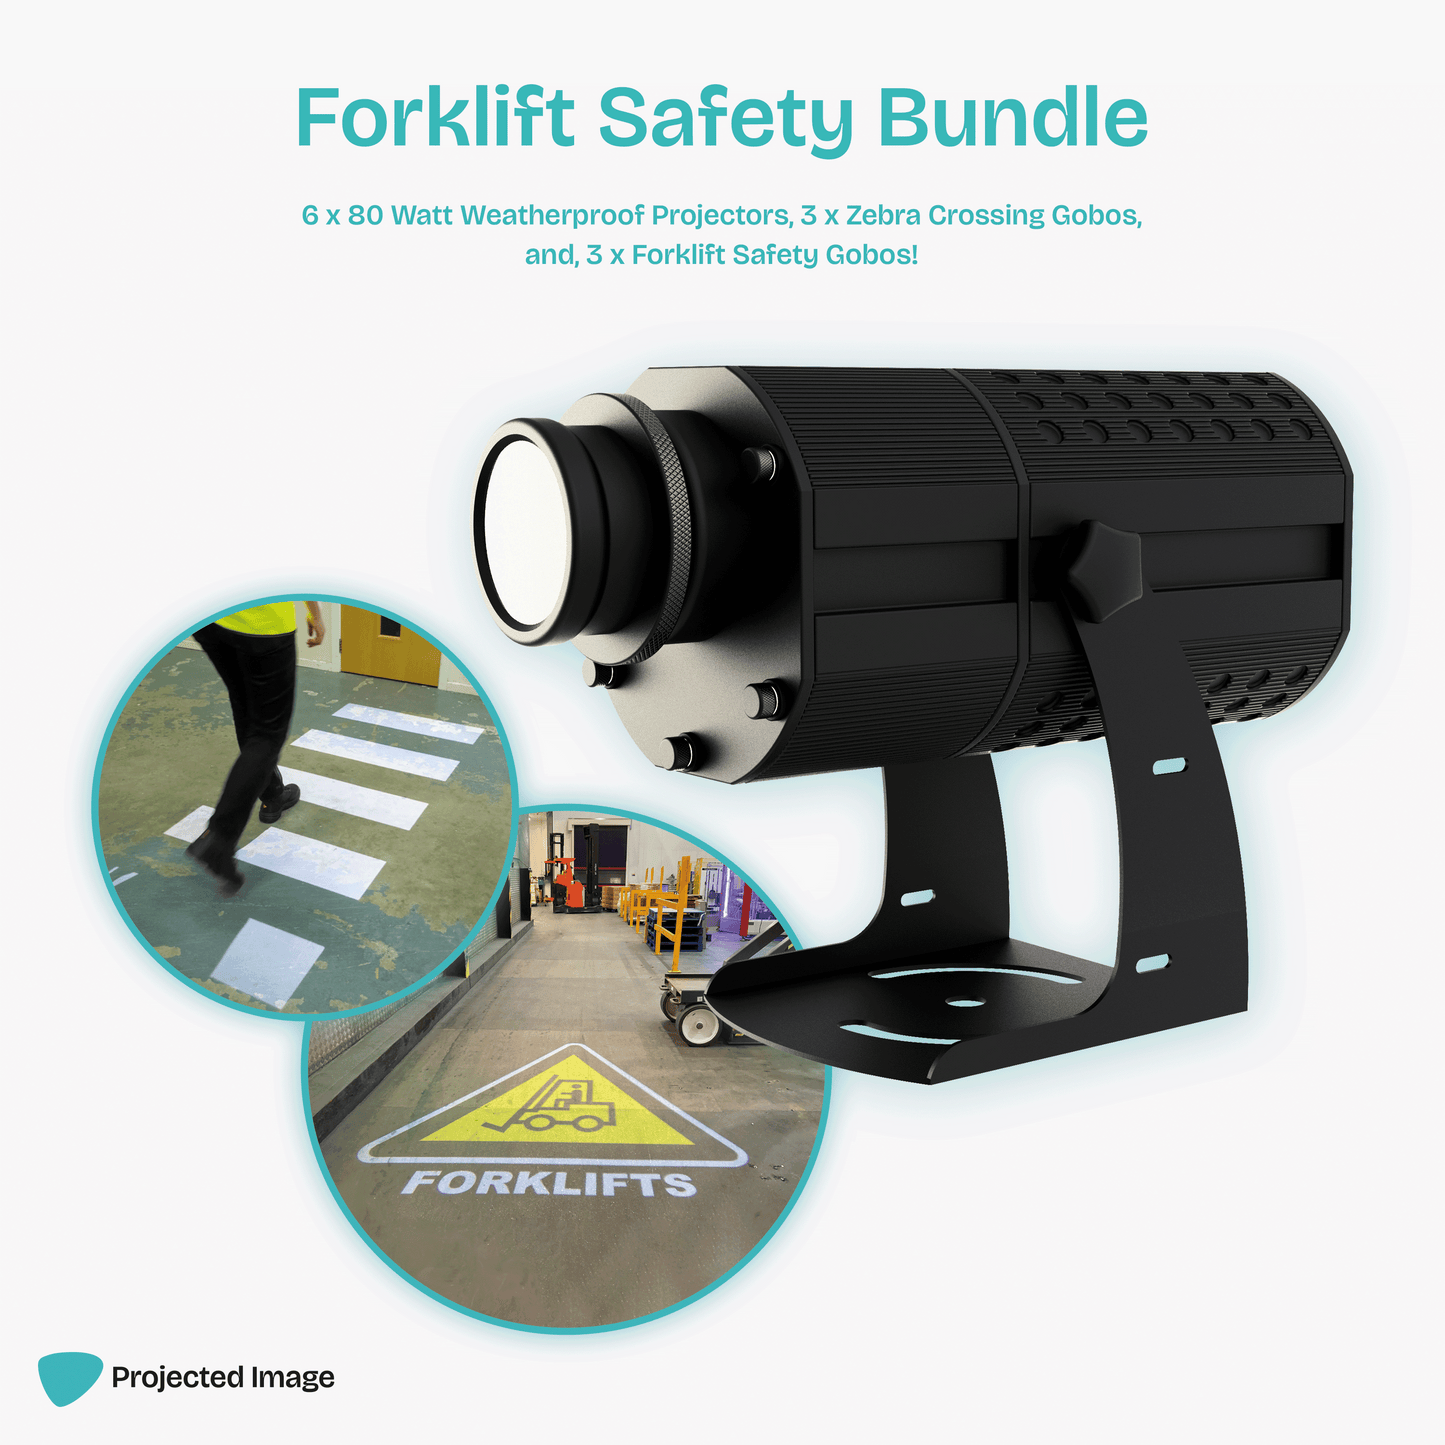 Forklift safety sign bundle for warehouse safety signage. Featuring a black 80 watt gobo projector, zebra crossing sign and forklift safety floor marking.